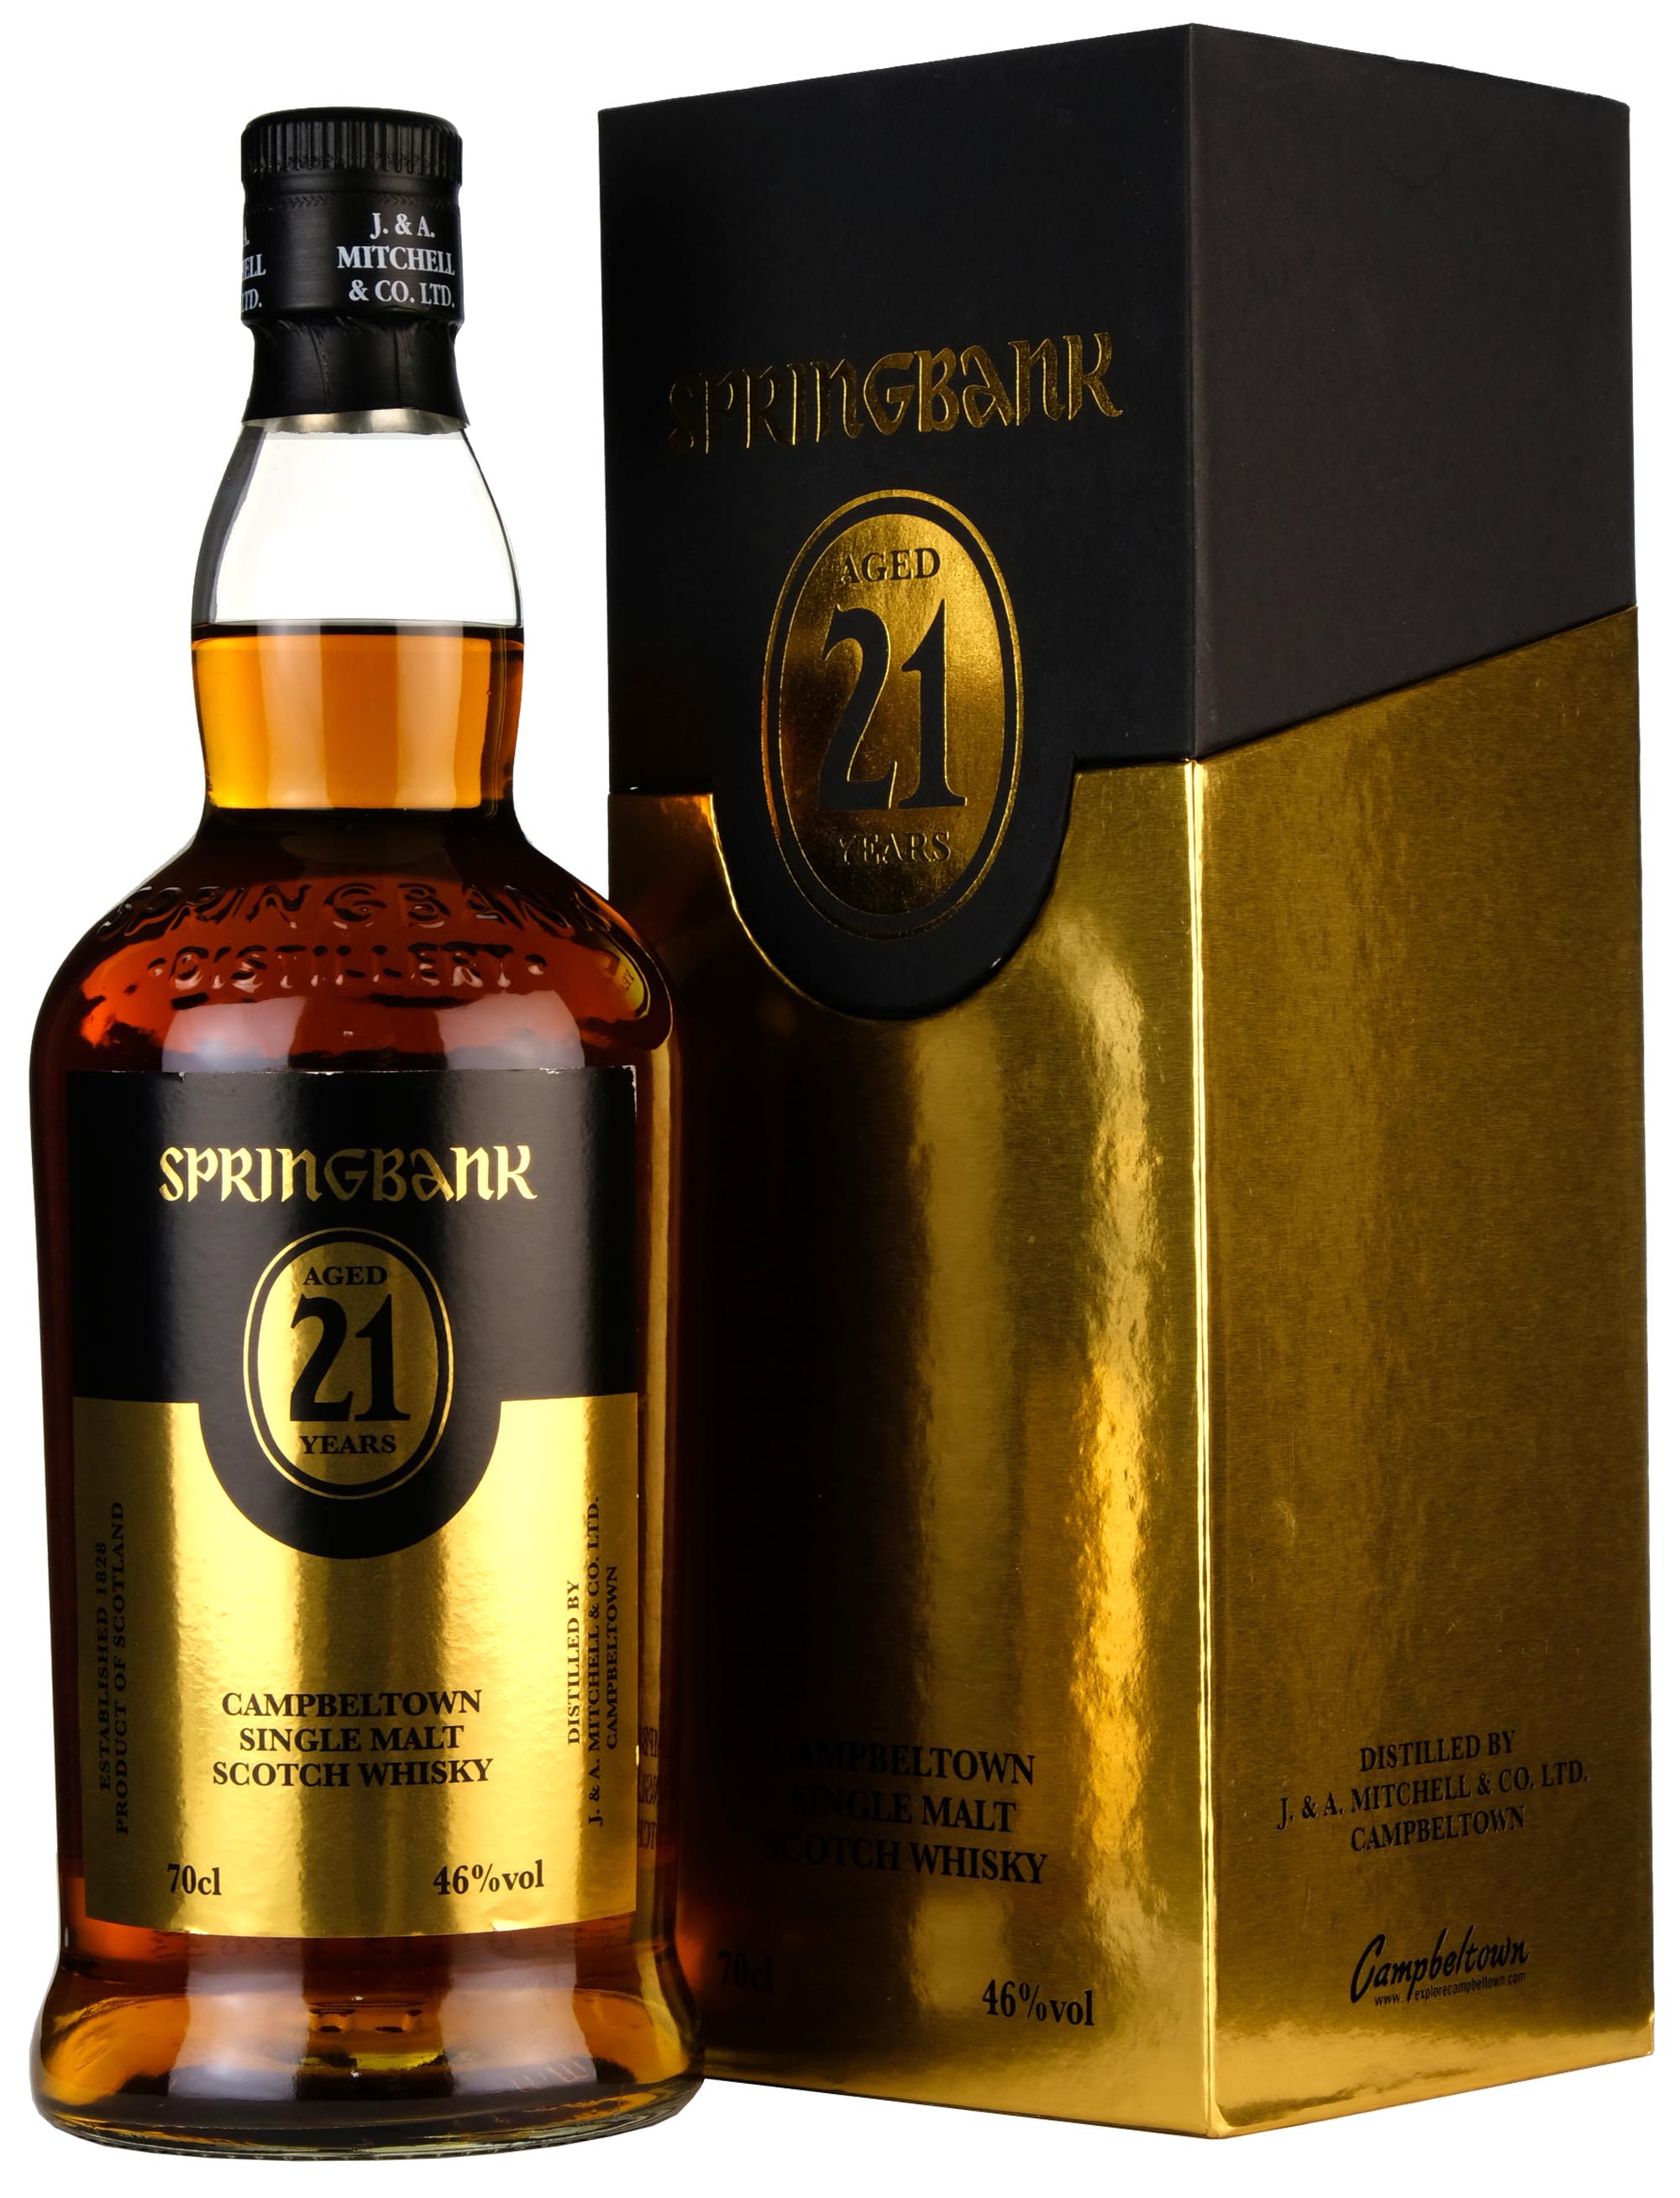 Springbank 21 Year Old Limited Edition 2019 Release